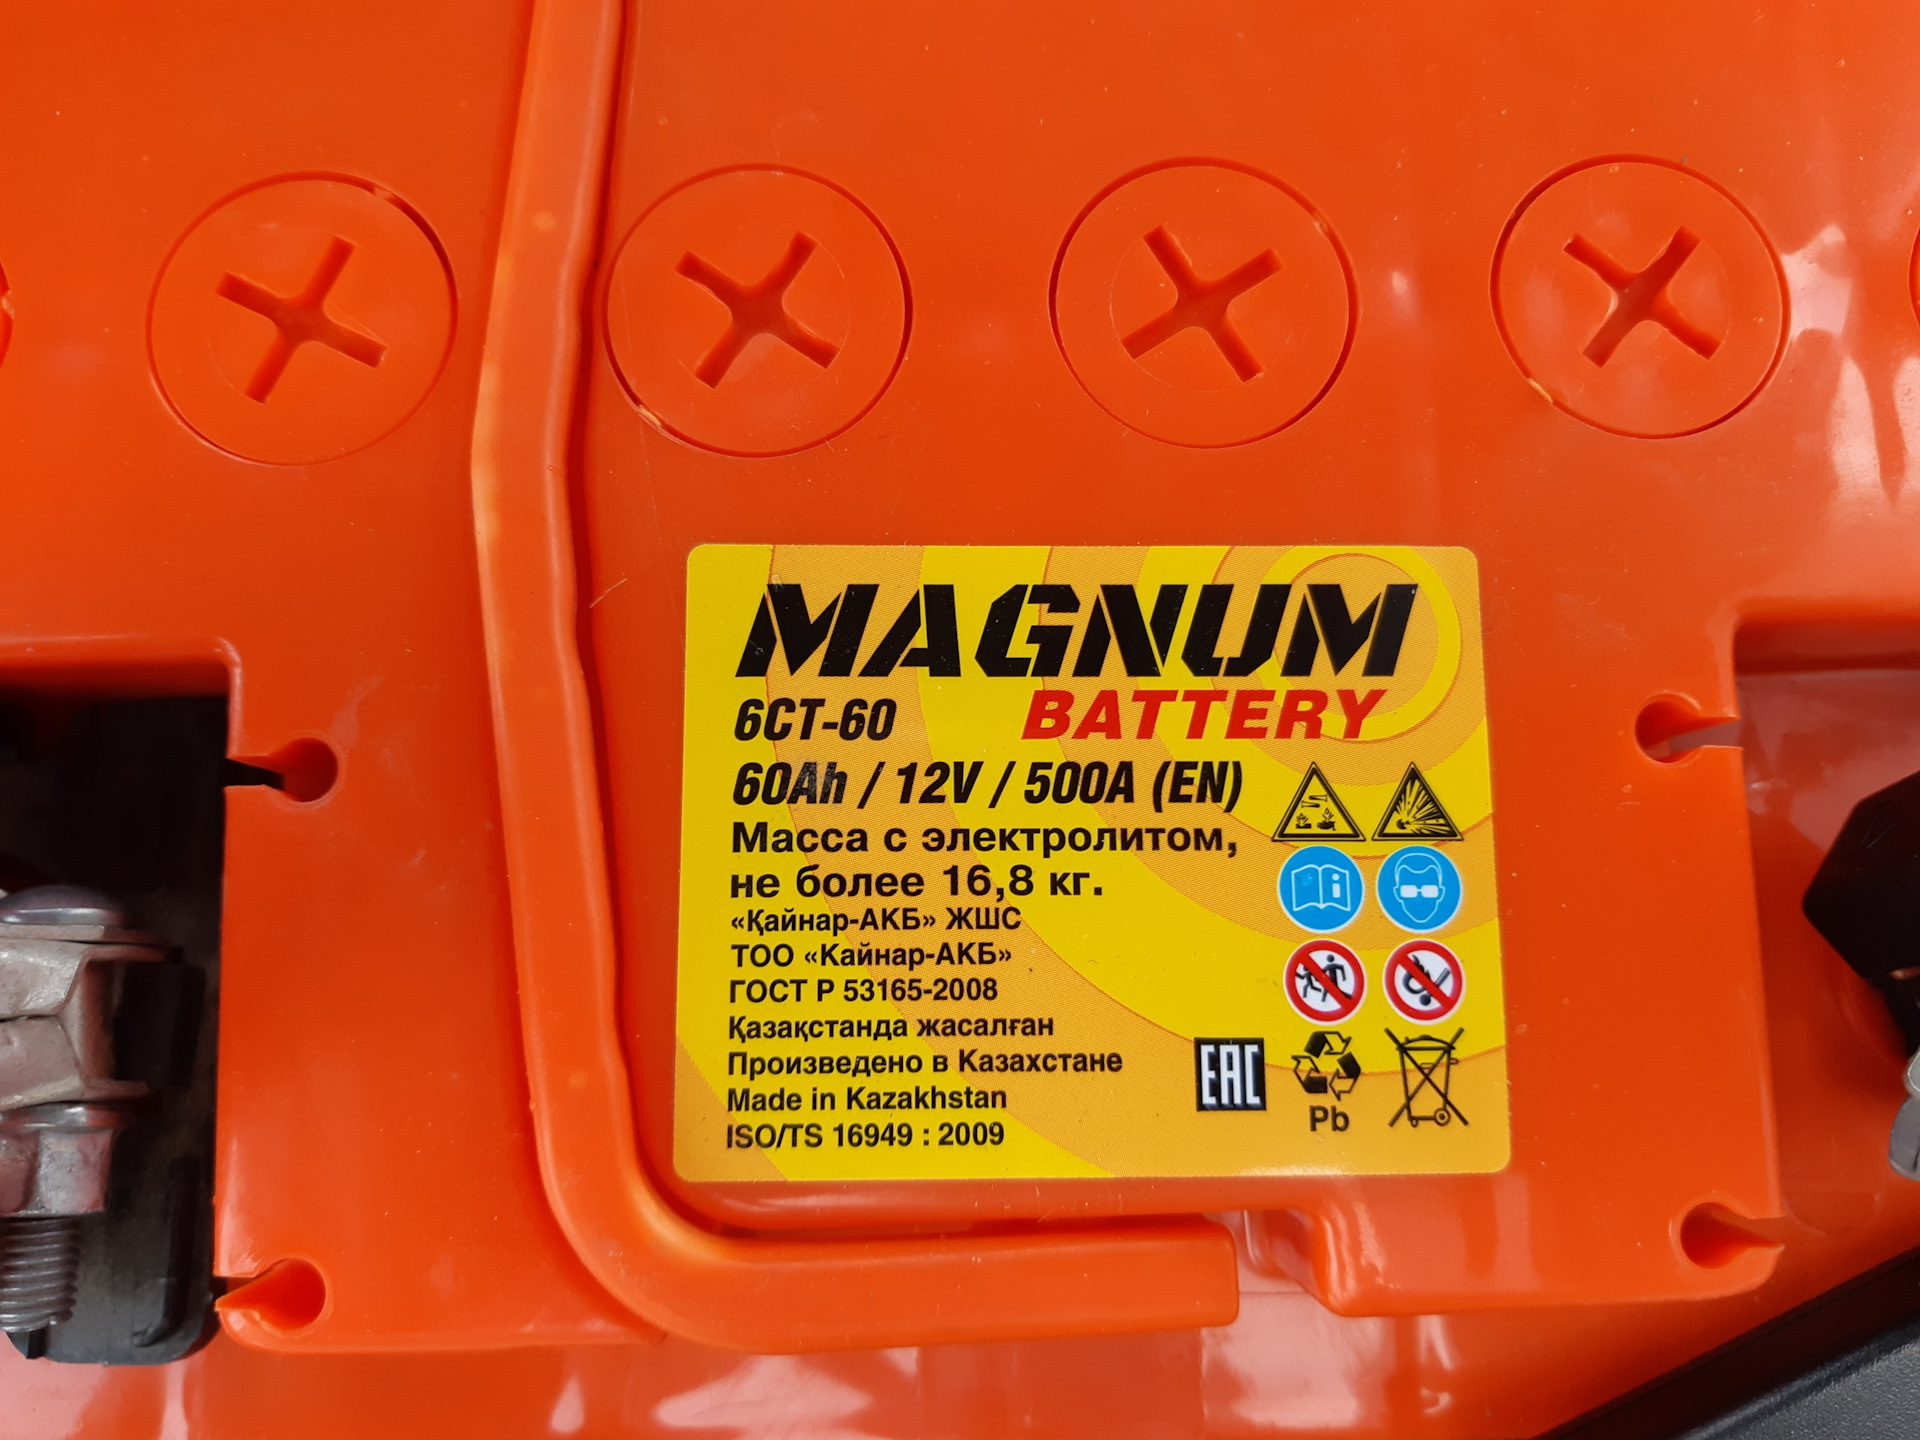 Magnum technology made in